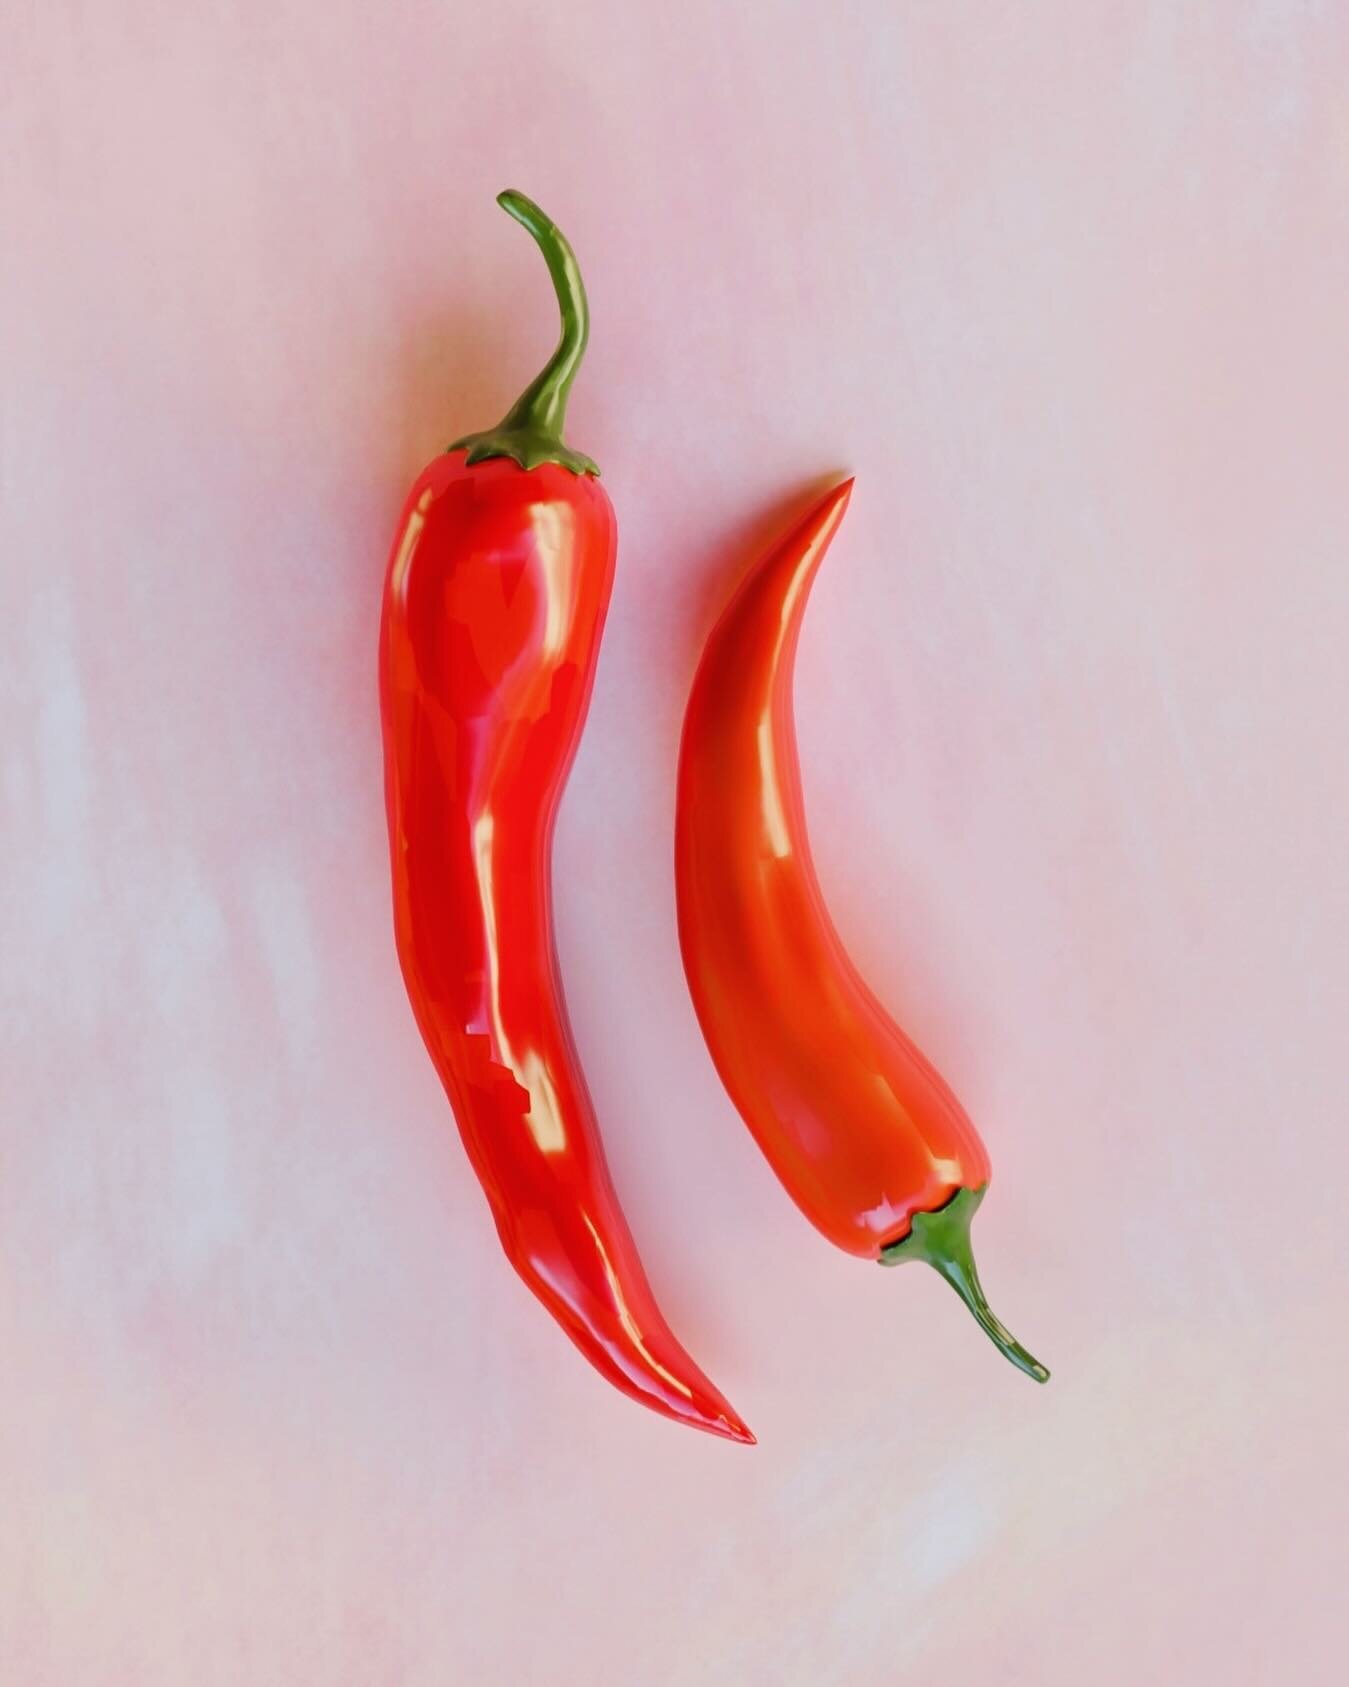 Just learned that you can create a painterly style by painting the normals. Here&rsquo;s my take on my favorite chili peppers🌶️☺️

#3dart #3dartist #3dmodeling #blender3d #3drender #cyclesrender #3dillustration #blenderrender #3dartwork